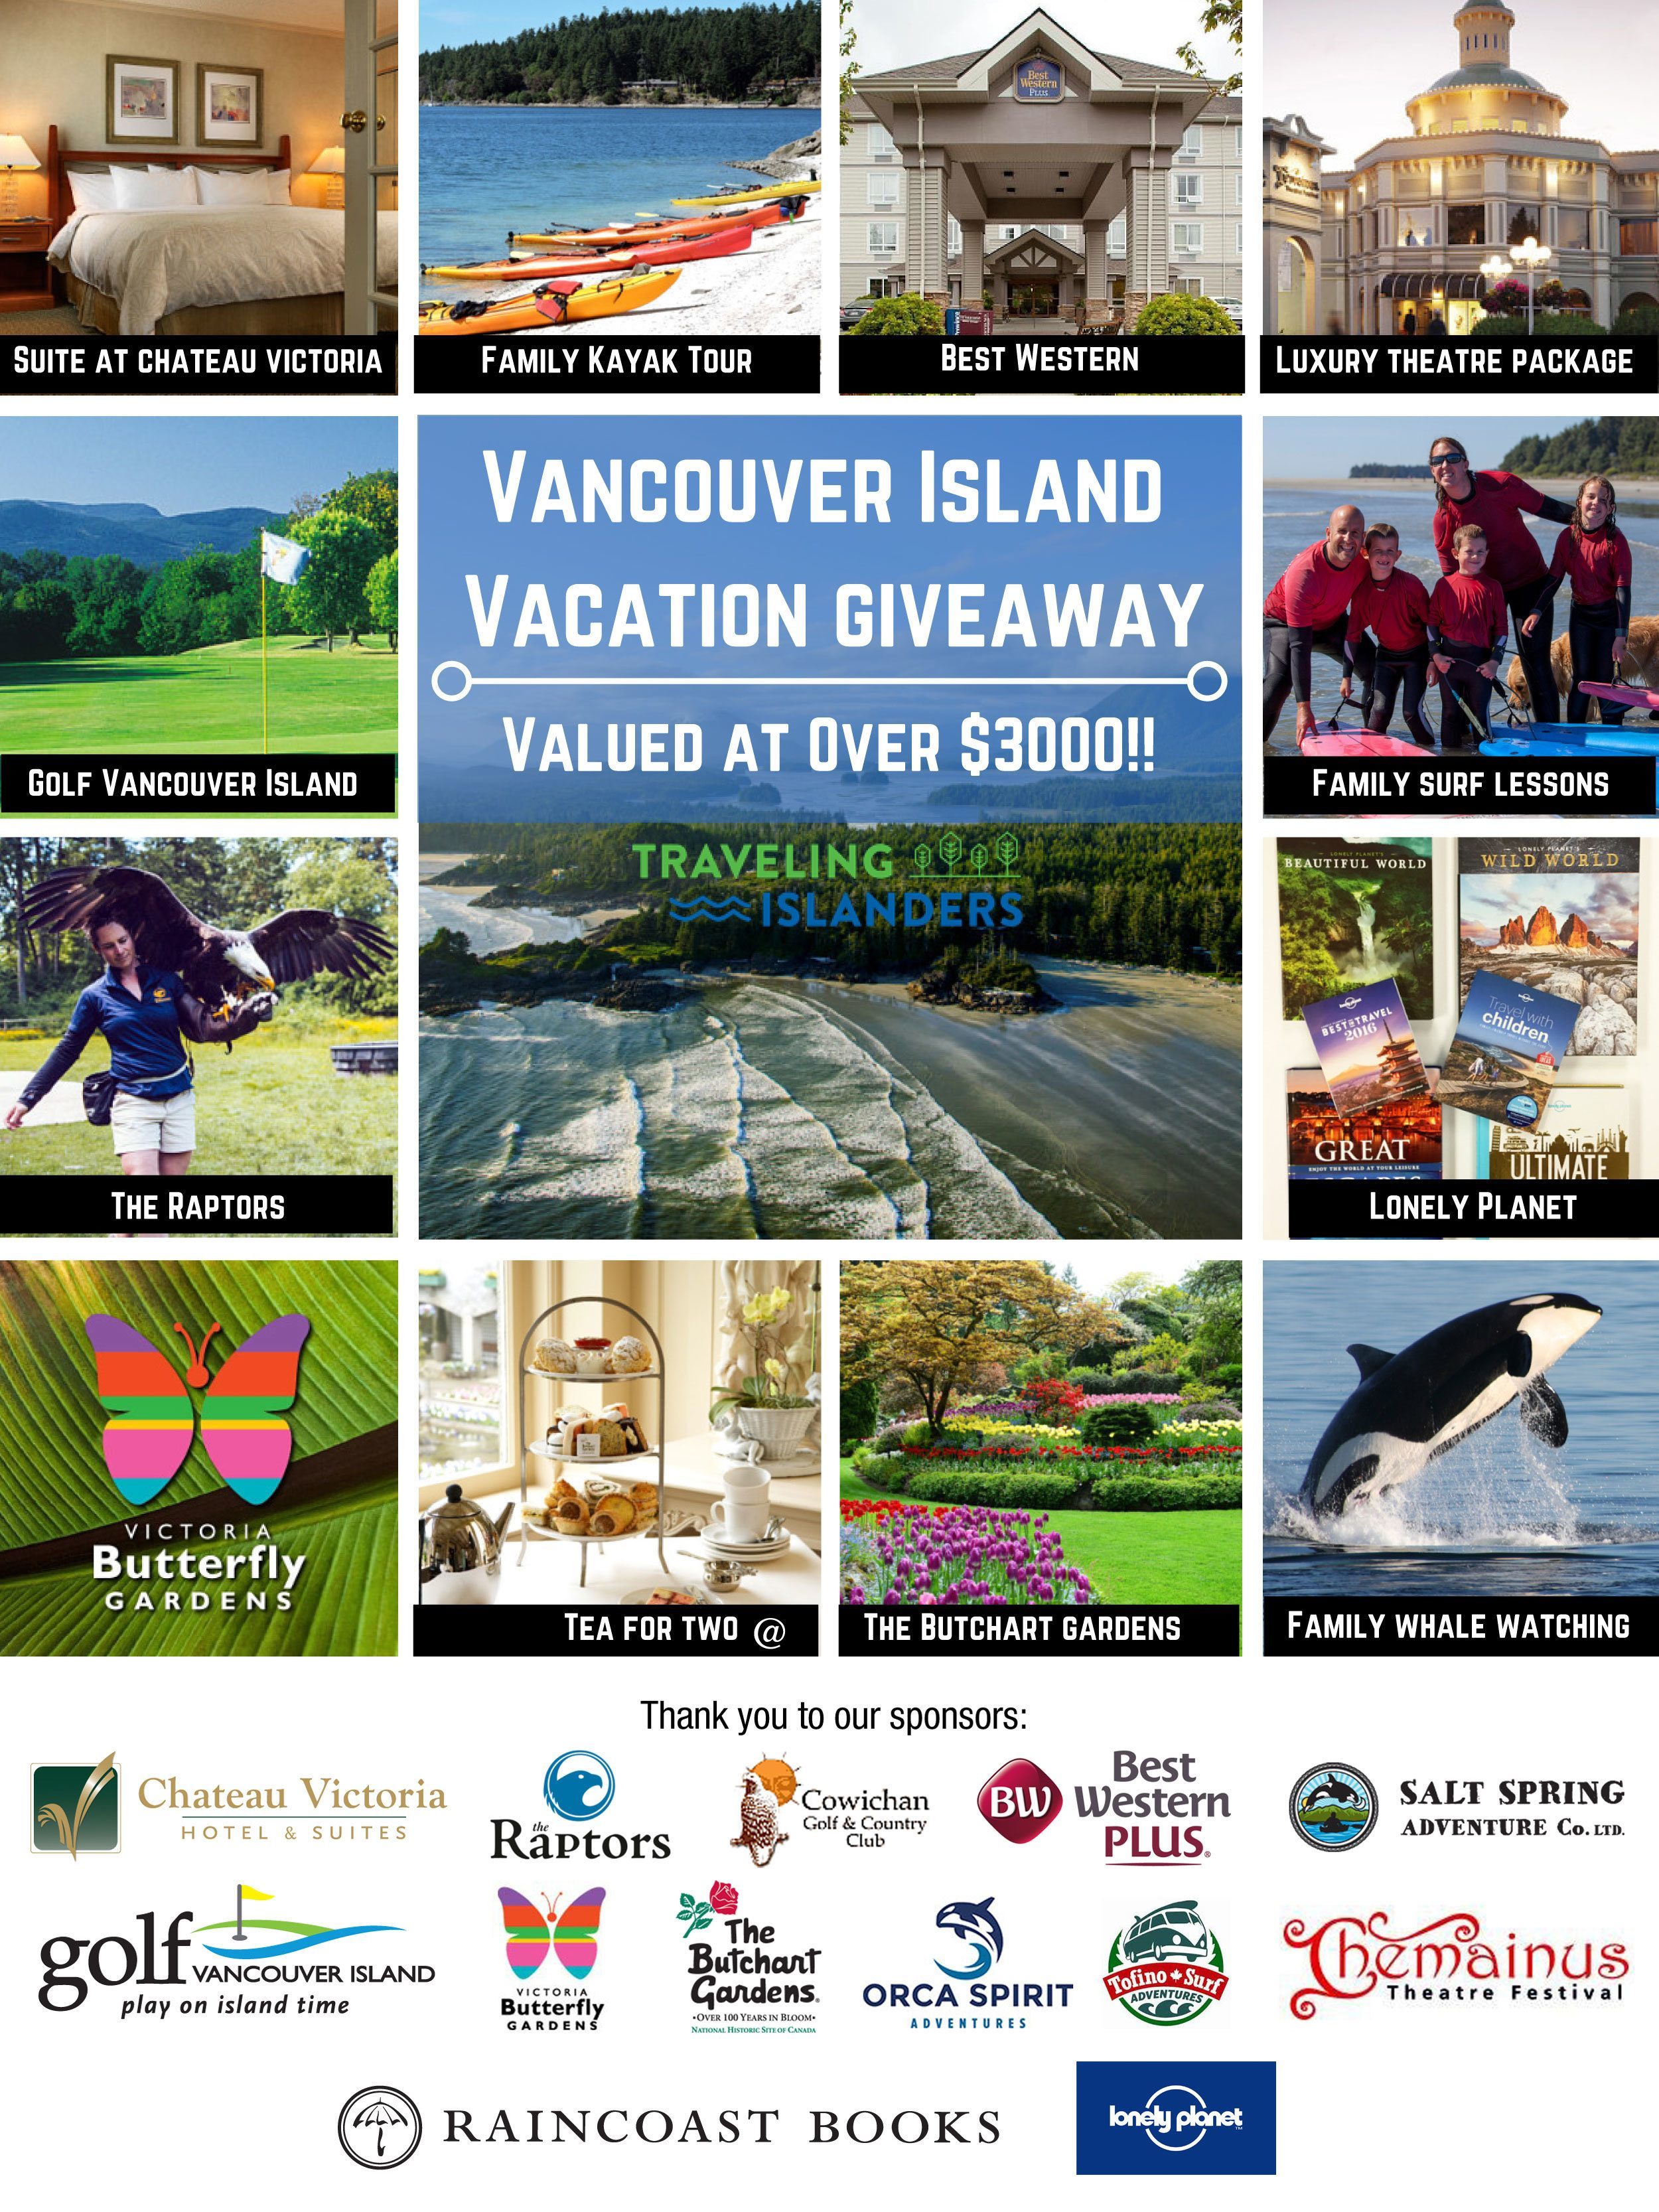 Vancouver Island Vacation Giveaway